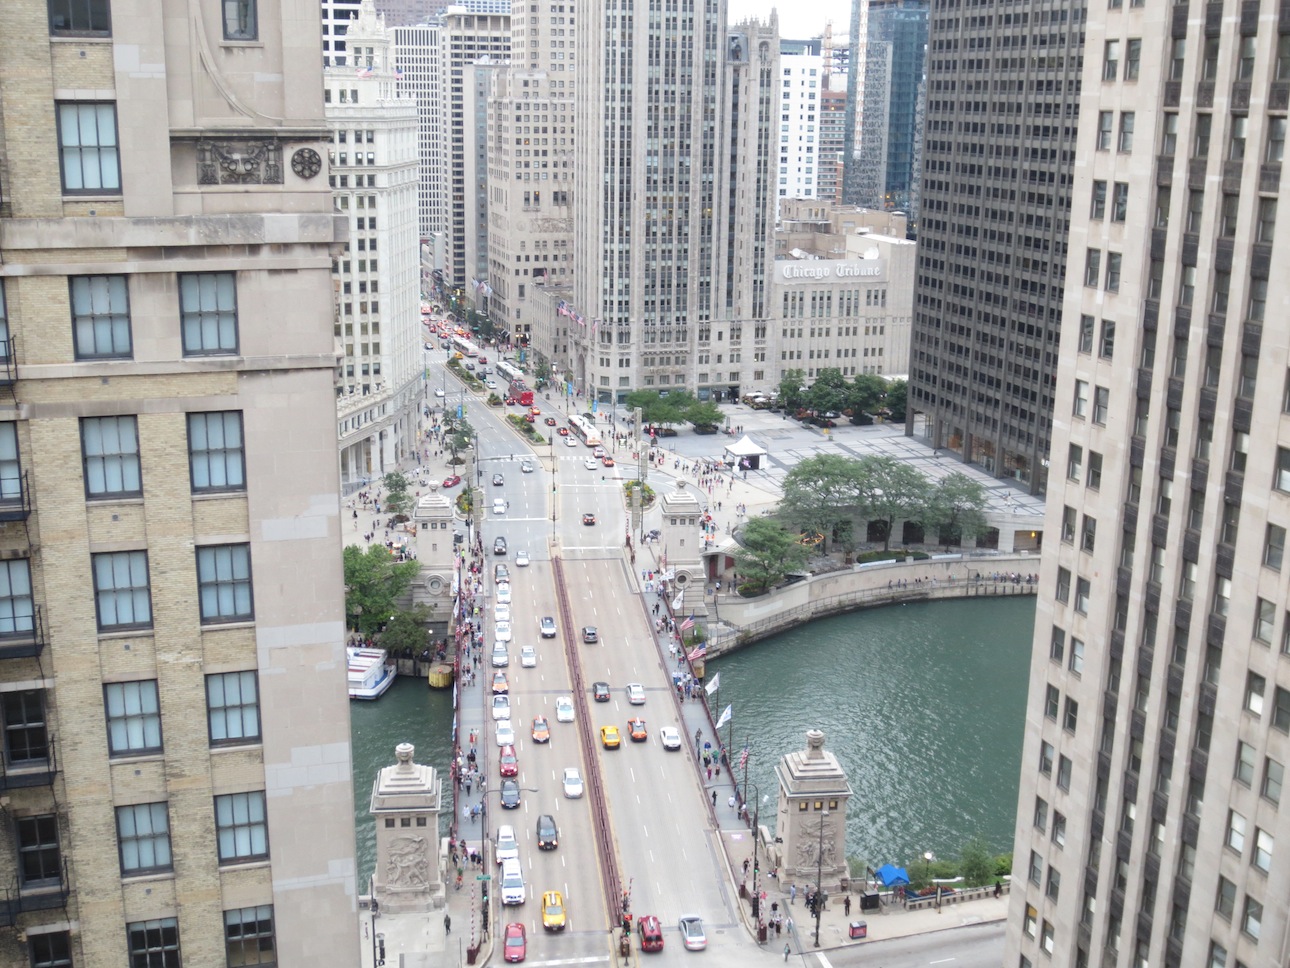 Michigan Ave view from a balcony just south of the Chicago River